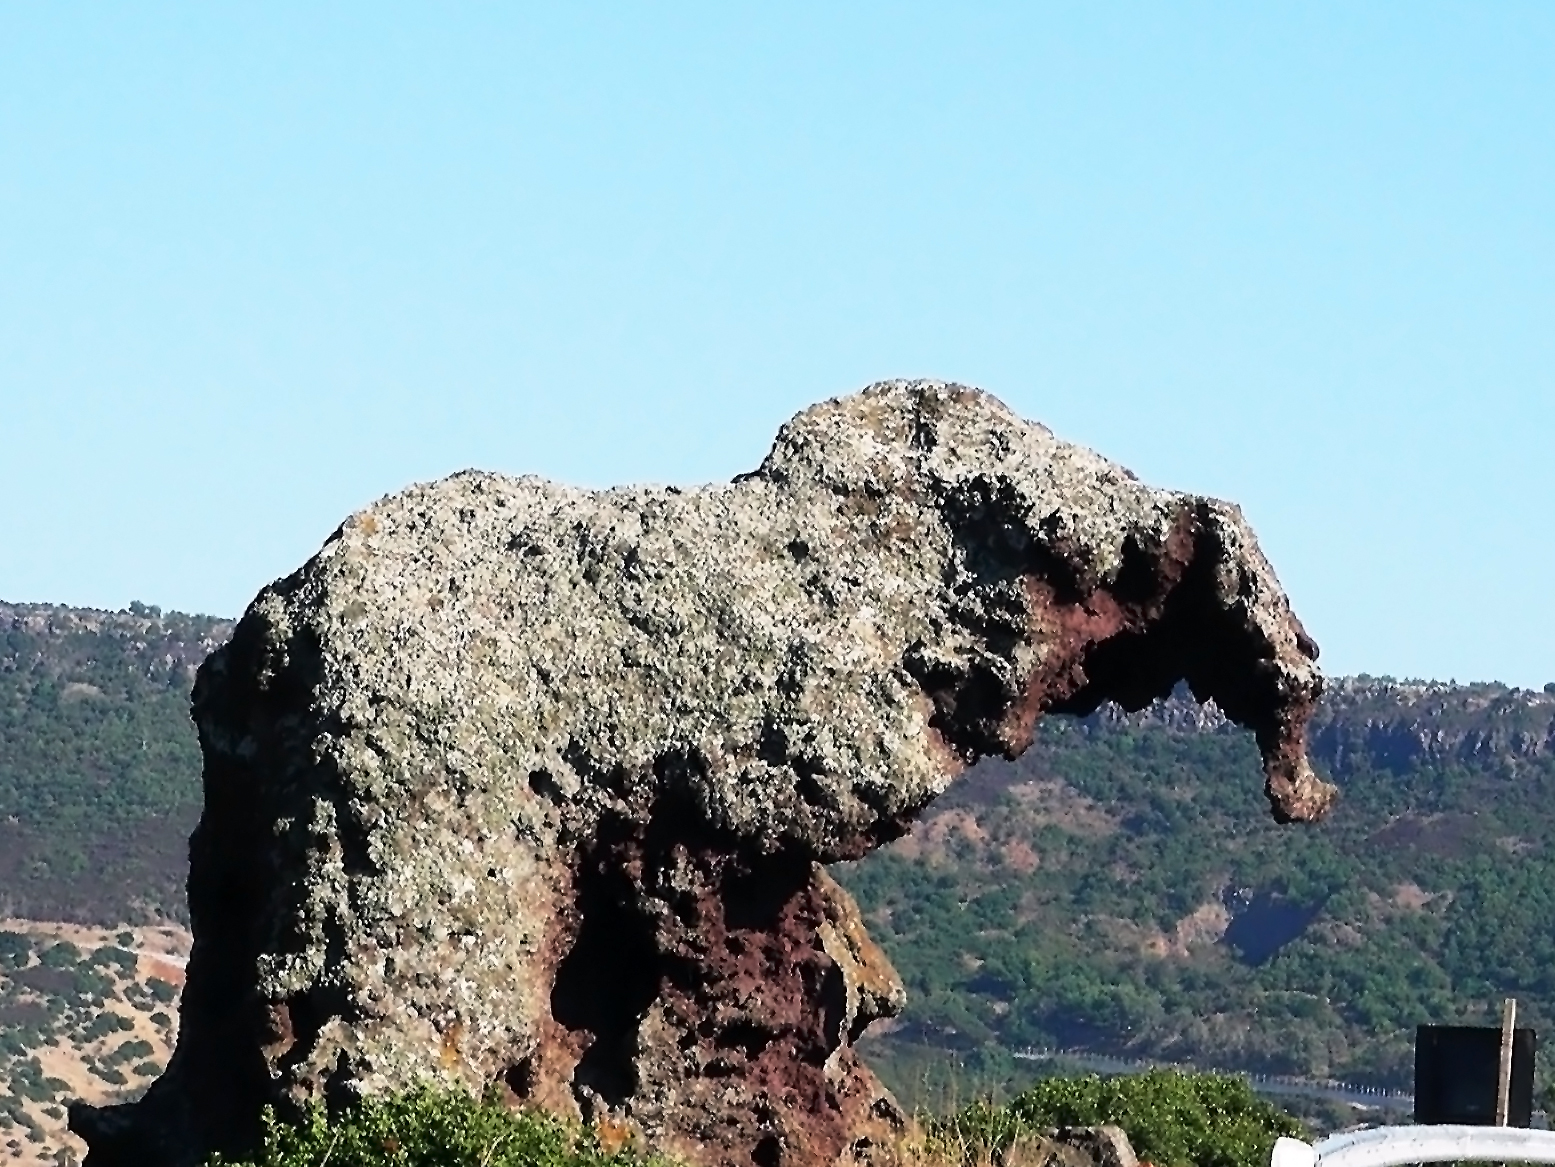 The Rock of the Elephant...